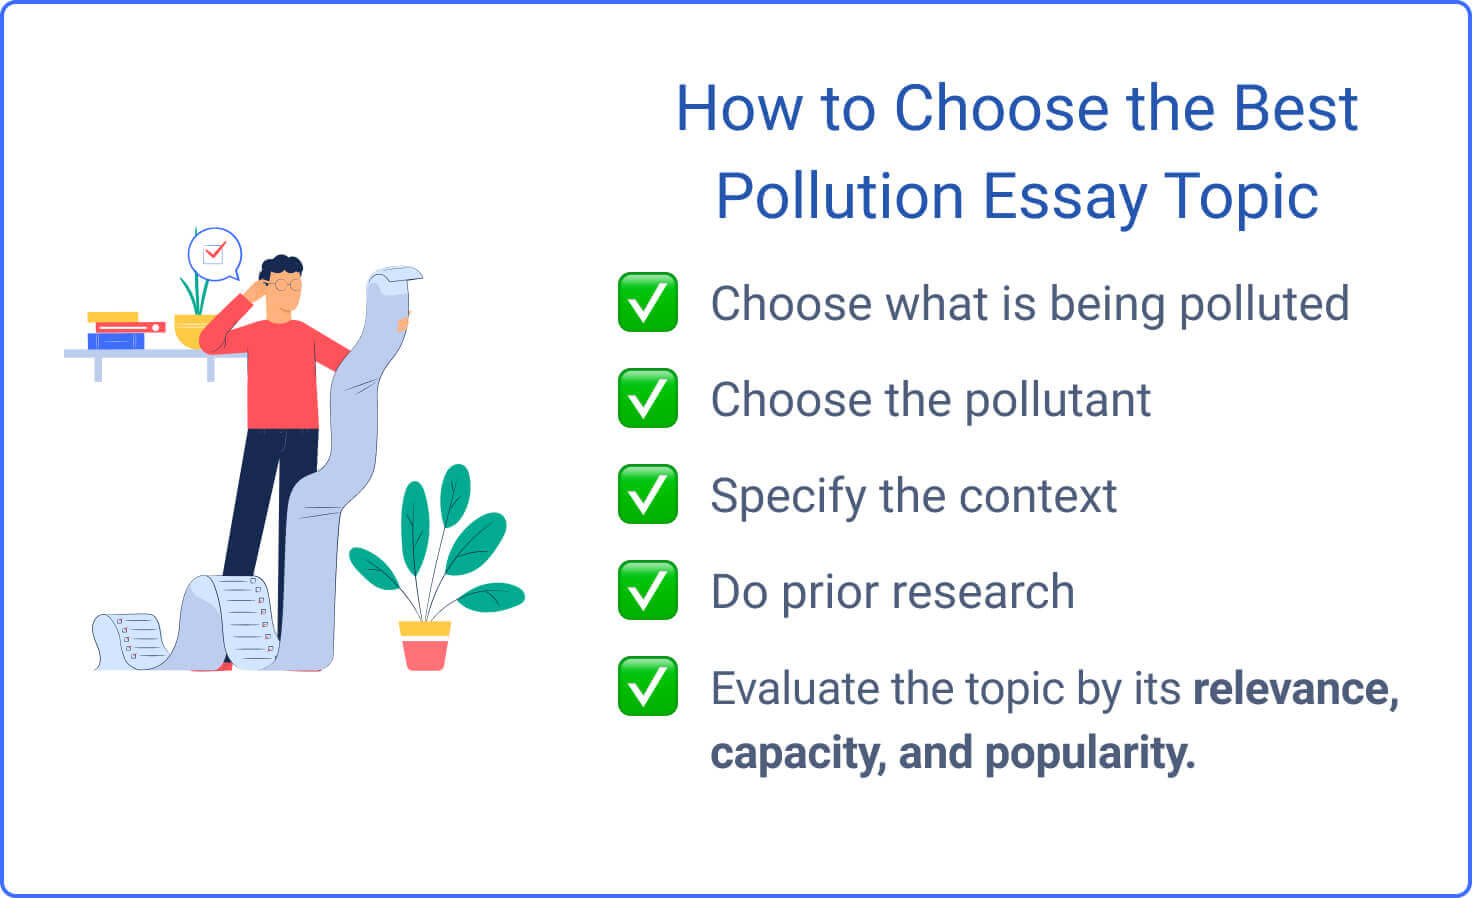 The picture provides tips on how to choose the best pollution essay topic.